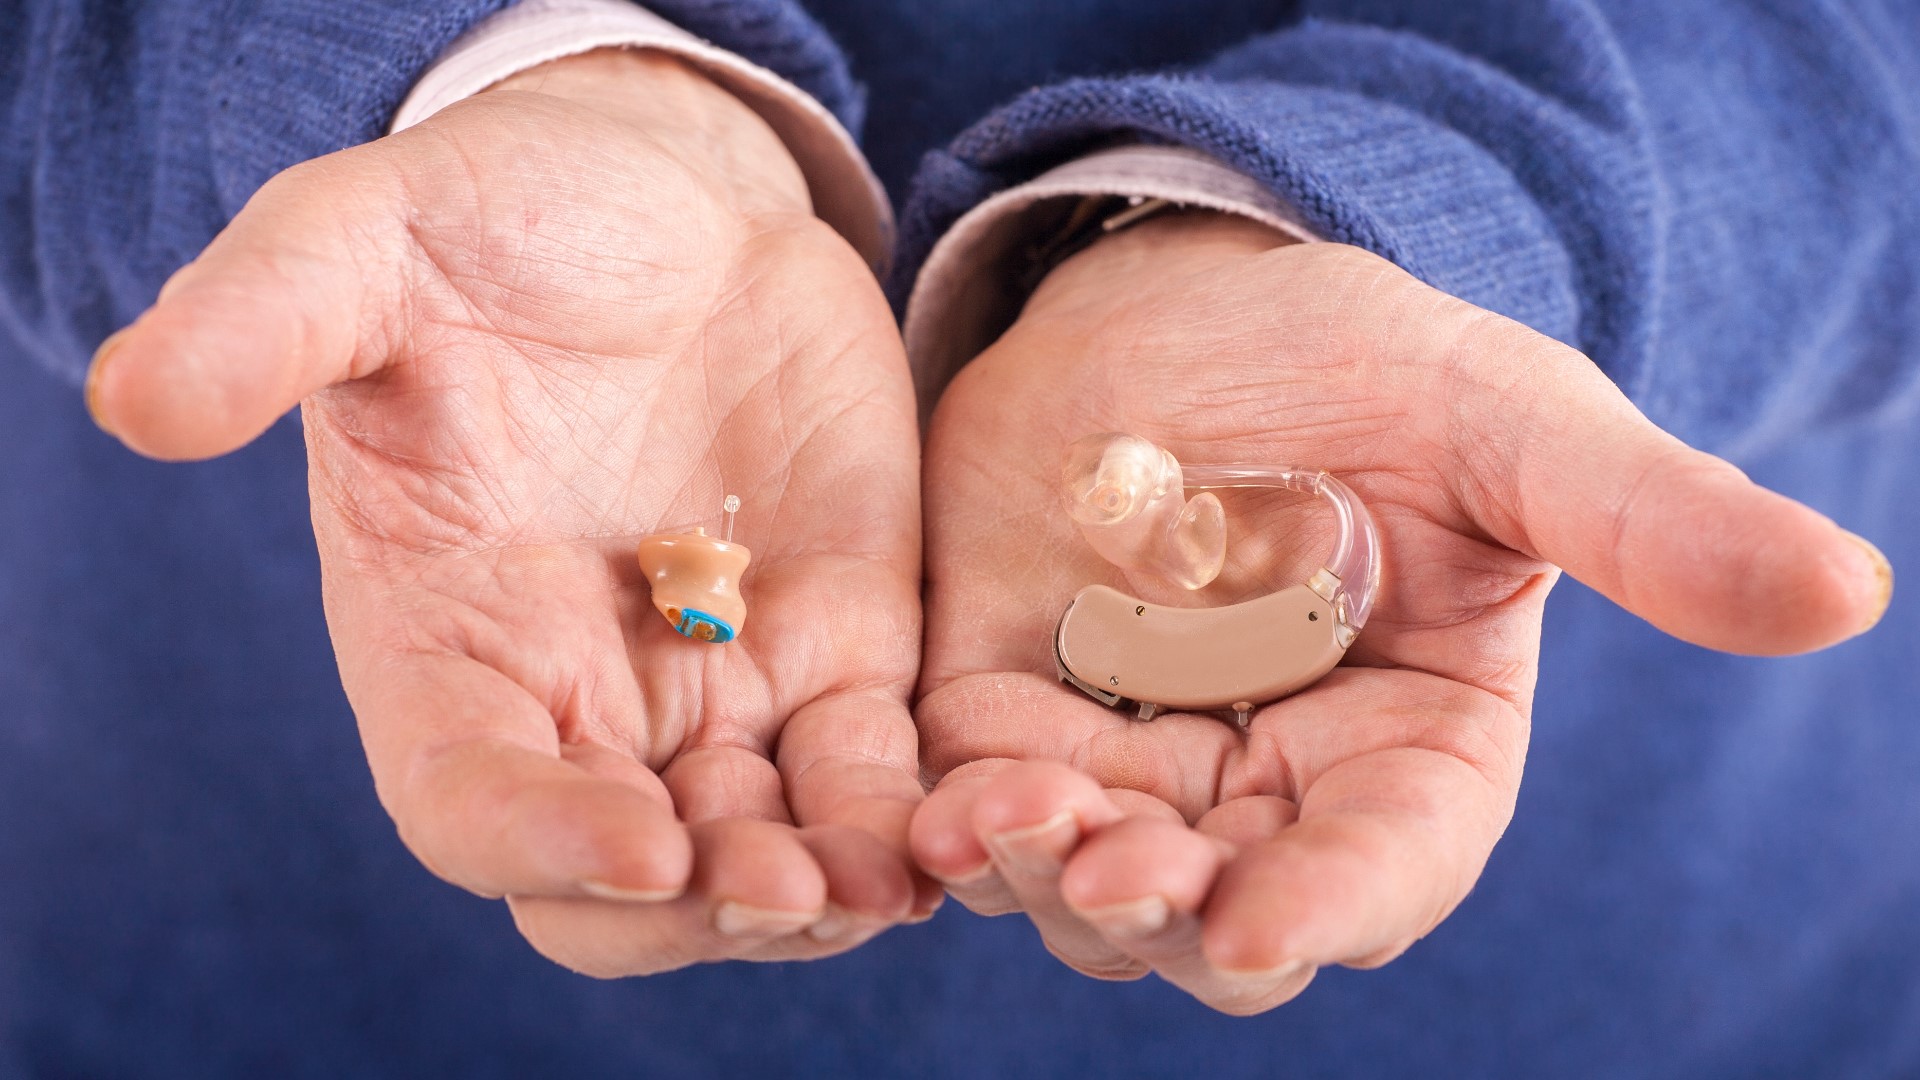 Over-the-counter hearing aids are now available. We spoke to an audiologist to find out what you should know when shopping for hearing aids.